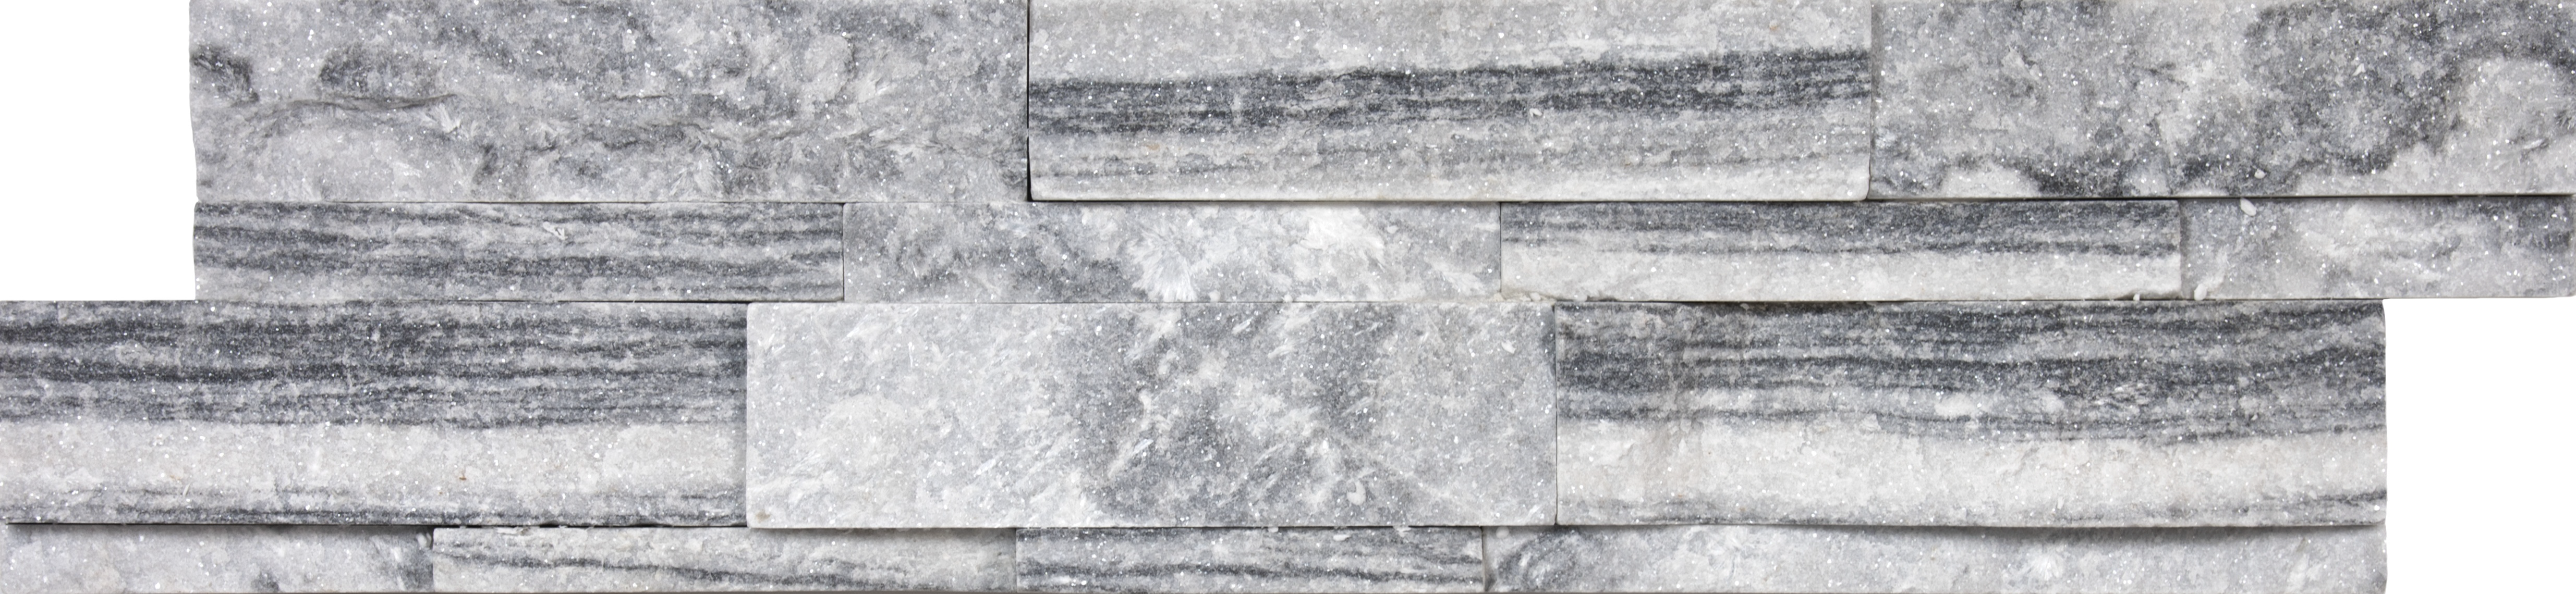 quartzite nordic crystal pattern natural stone field tile from ledger stone anatolia collection distributed by surface group international split face finish straight edge edge 6x24 rectangle shape